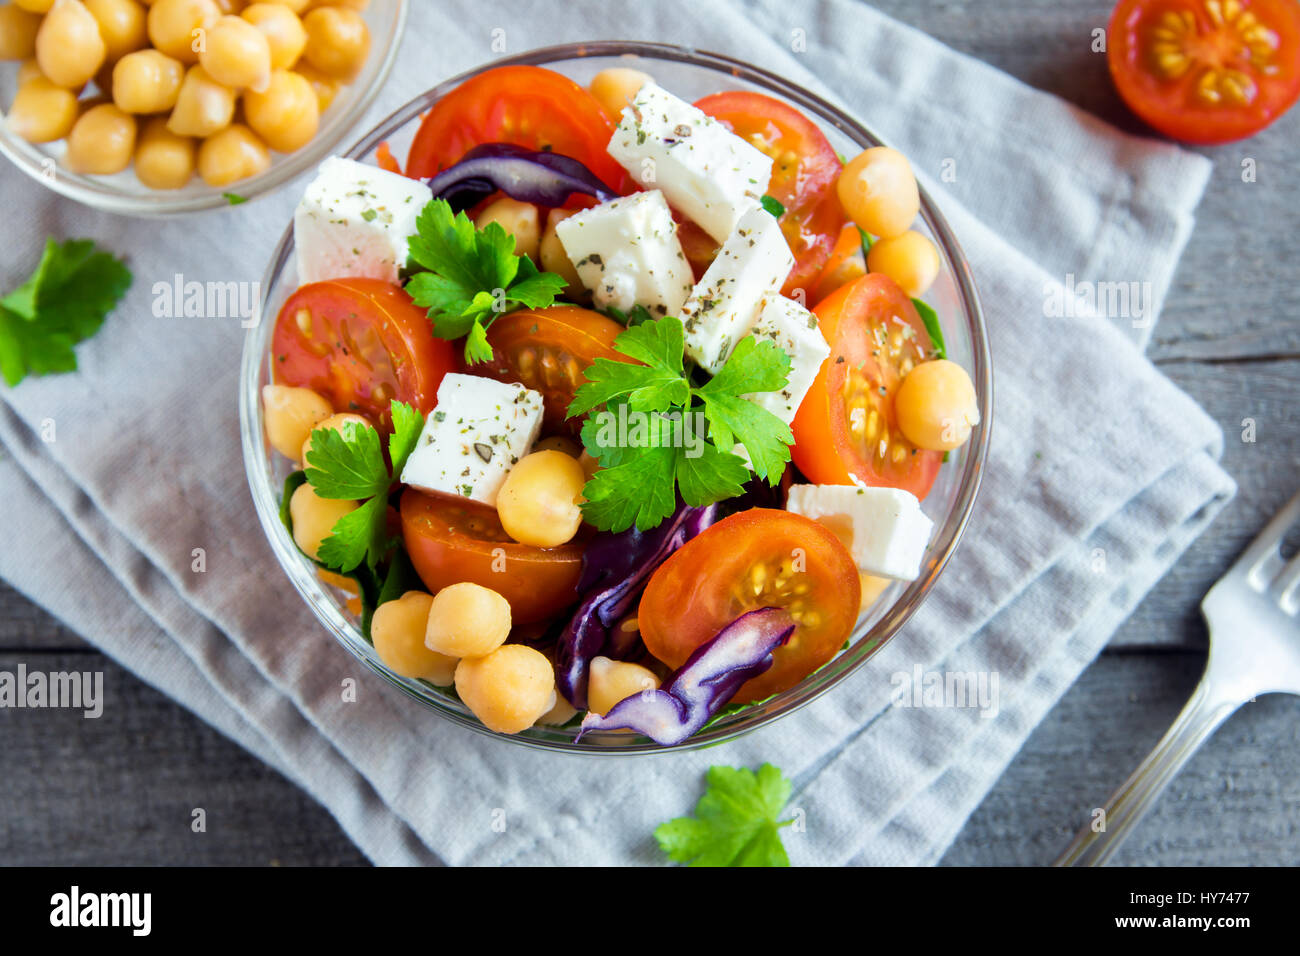 Chickpea and veggie salad with tomatoes, red cabbage, feta cheese (tofu) - healthy homemade vegan vegetarian diet detox salad meal food. Stock Photo